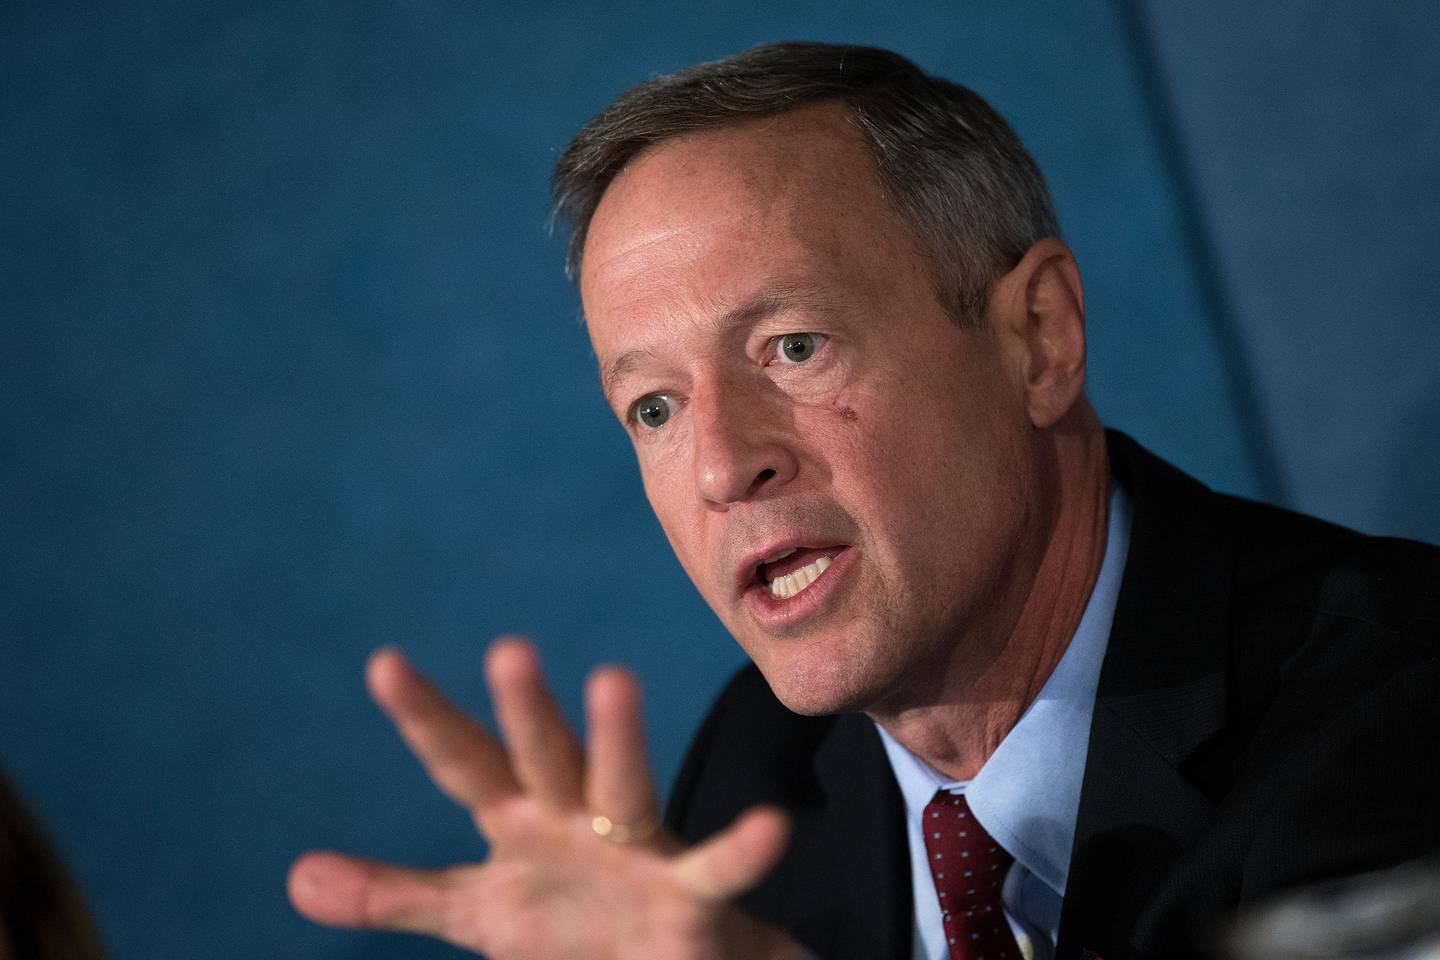 Martin O'Malley, wearing a dark suit and tie, holds his hand up in front of himself as he speaks.